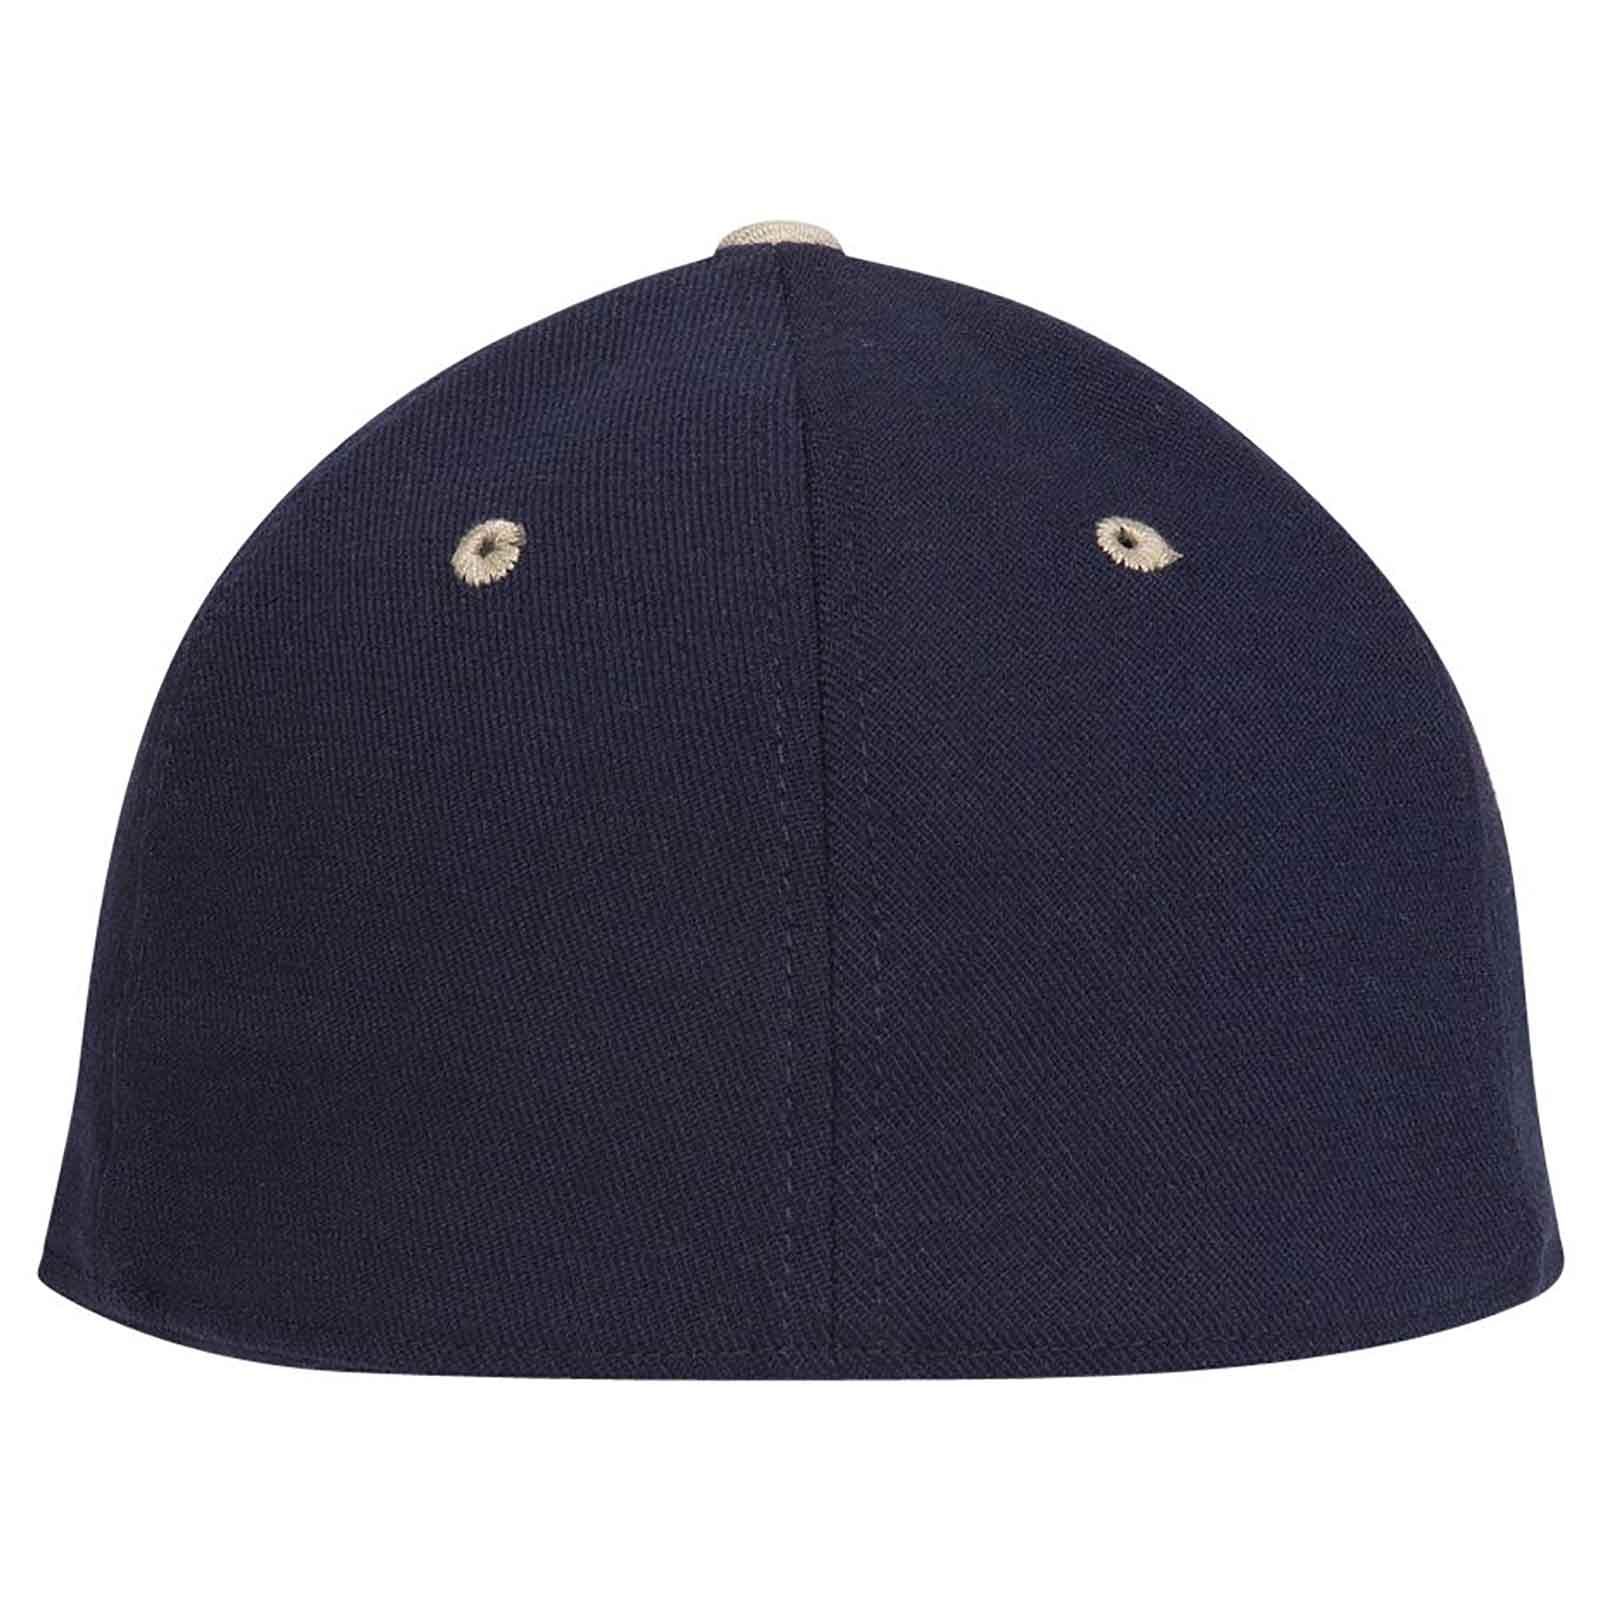 OTTO 11-194 Stretchable Wool Blend Low Profile Pro Style Cap - Khaki Navy - HIT a Double - 1